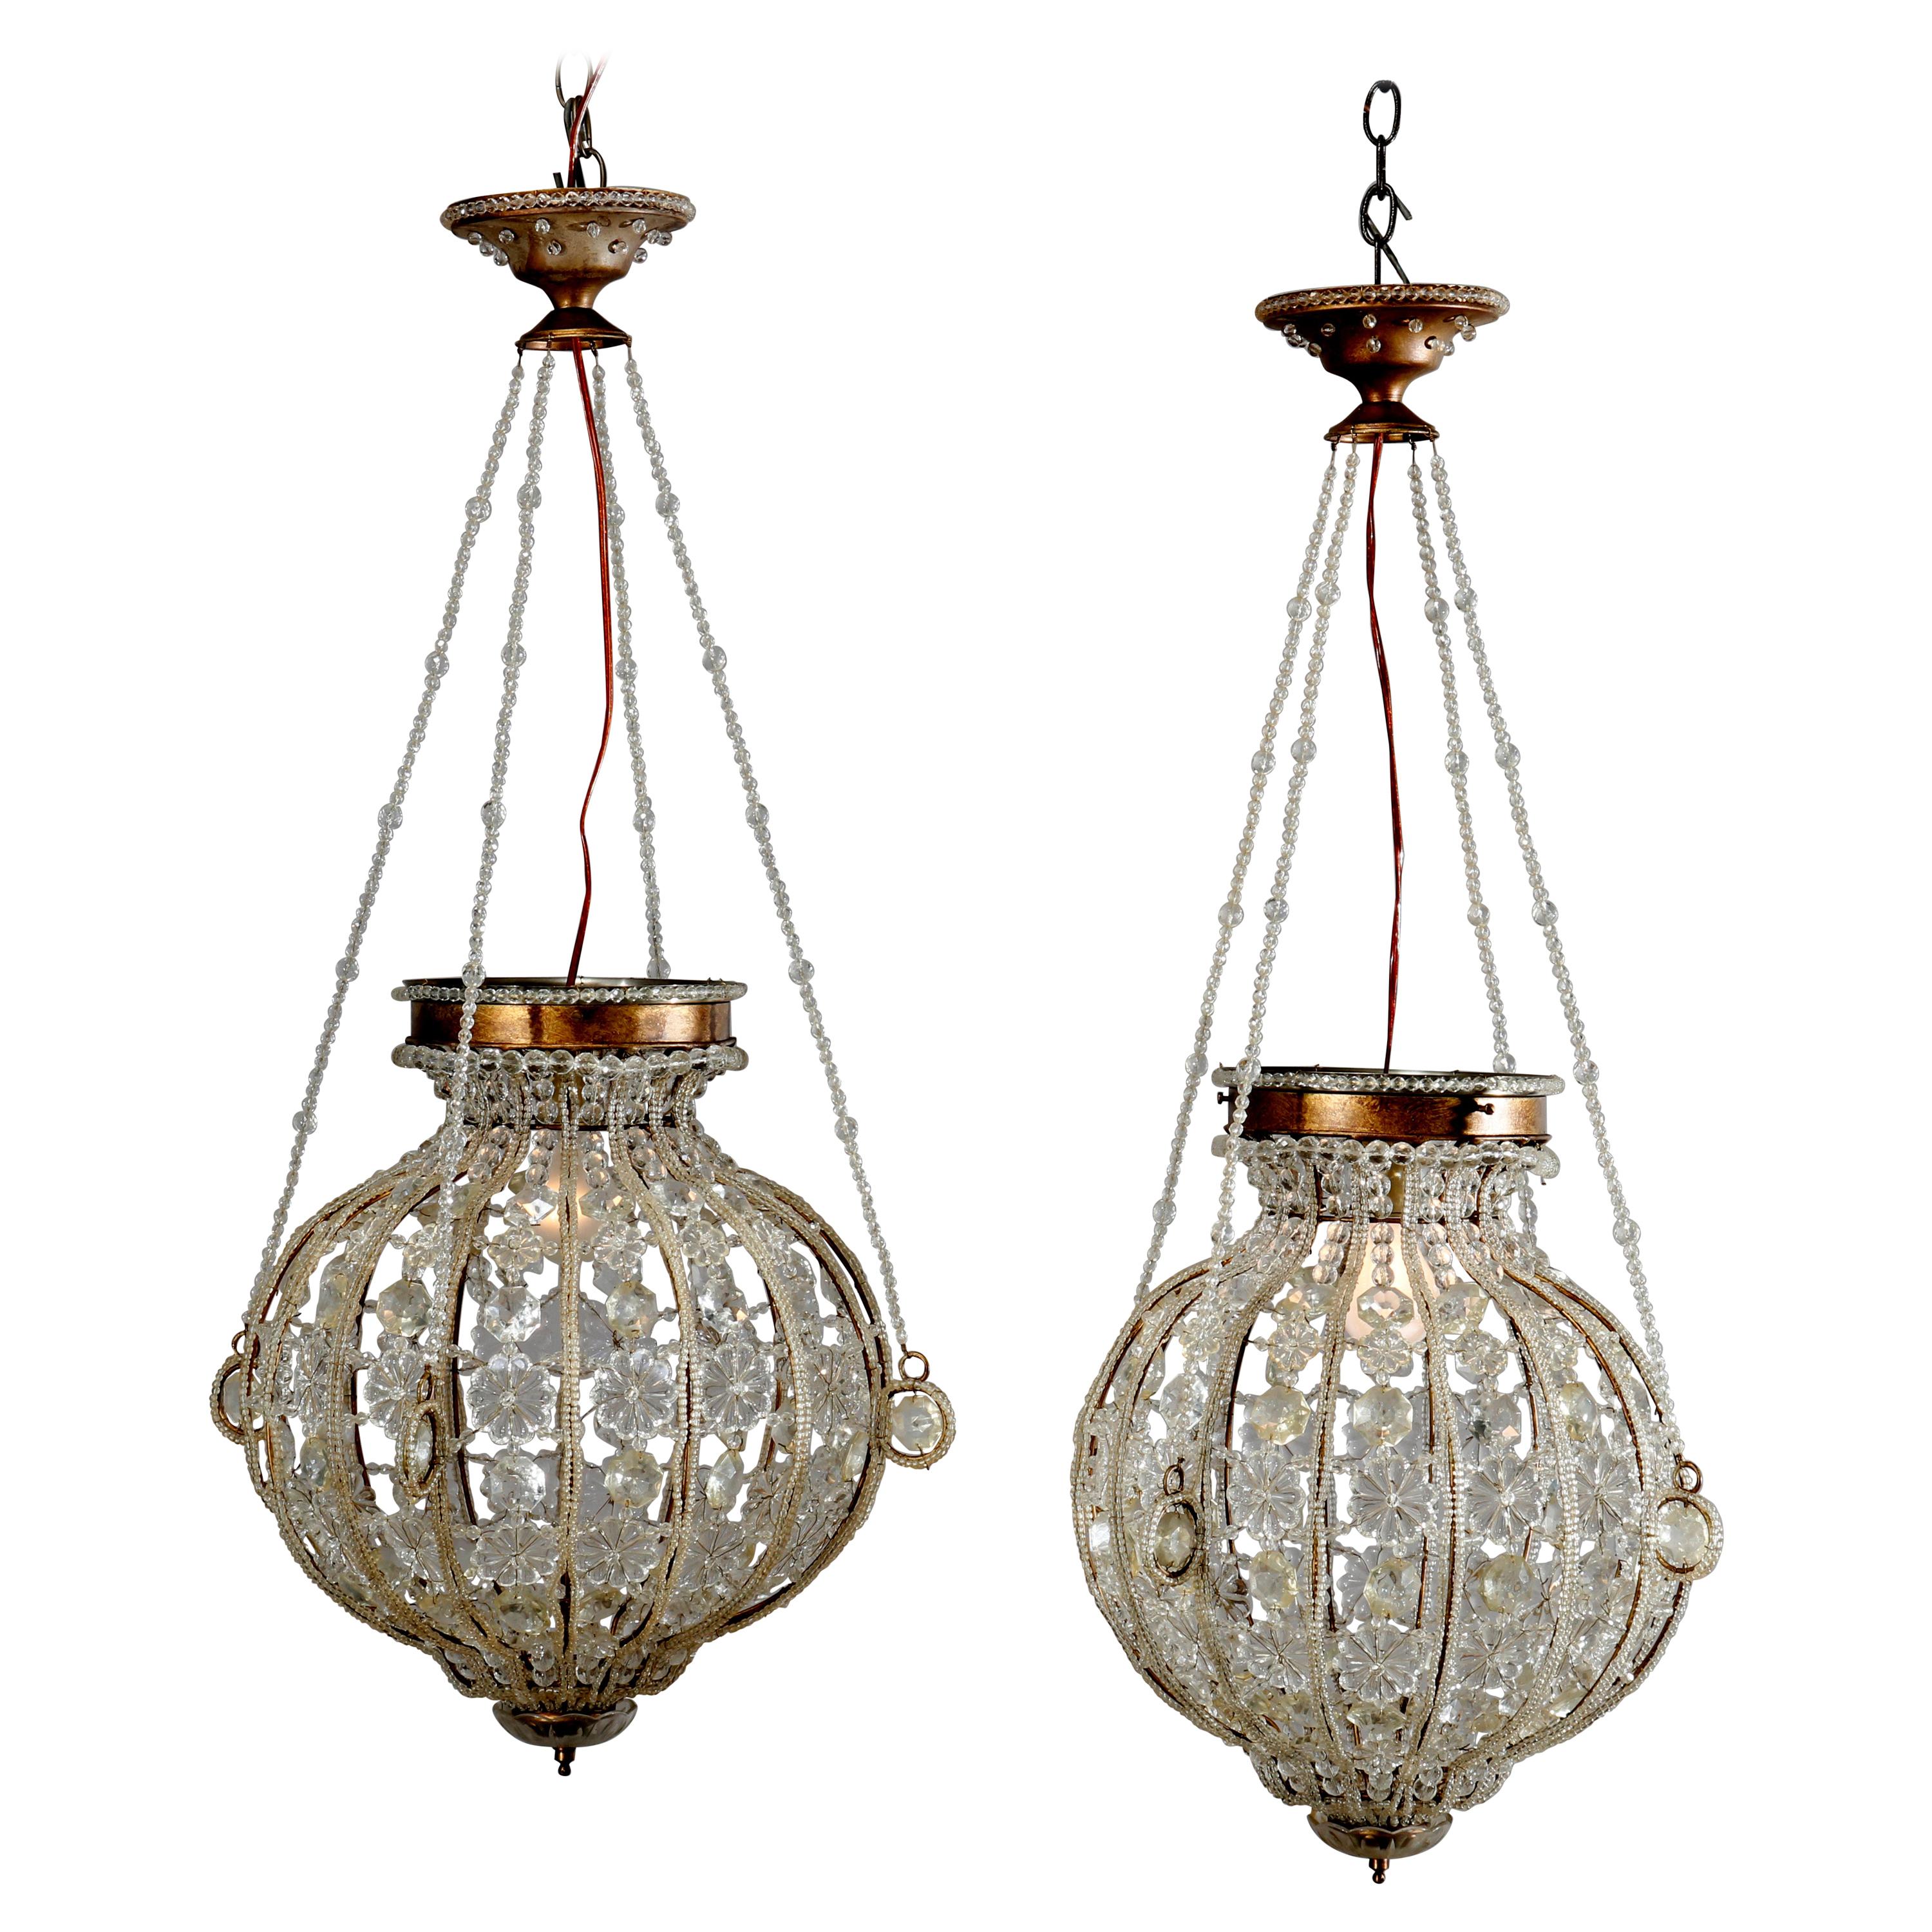 Vintage Pair of Spherical Brass and Cut Crystal Chandeliers, 20th Century